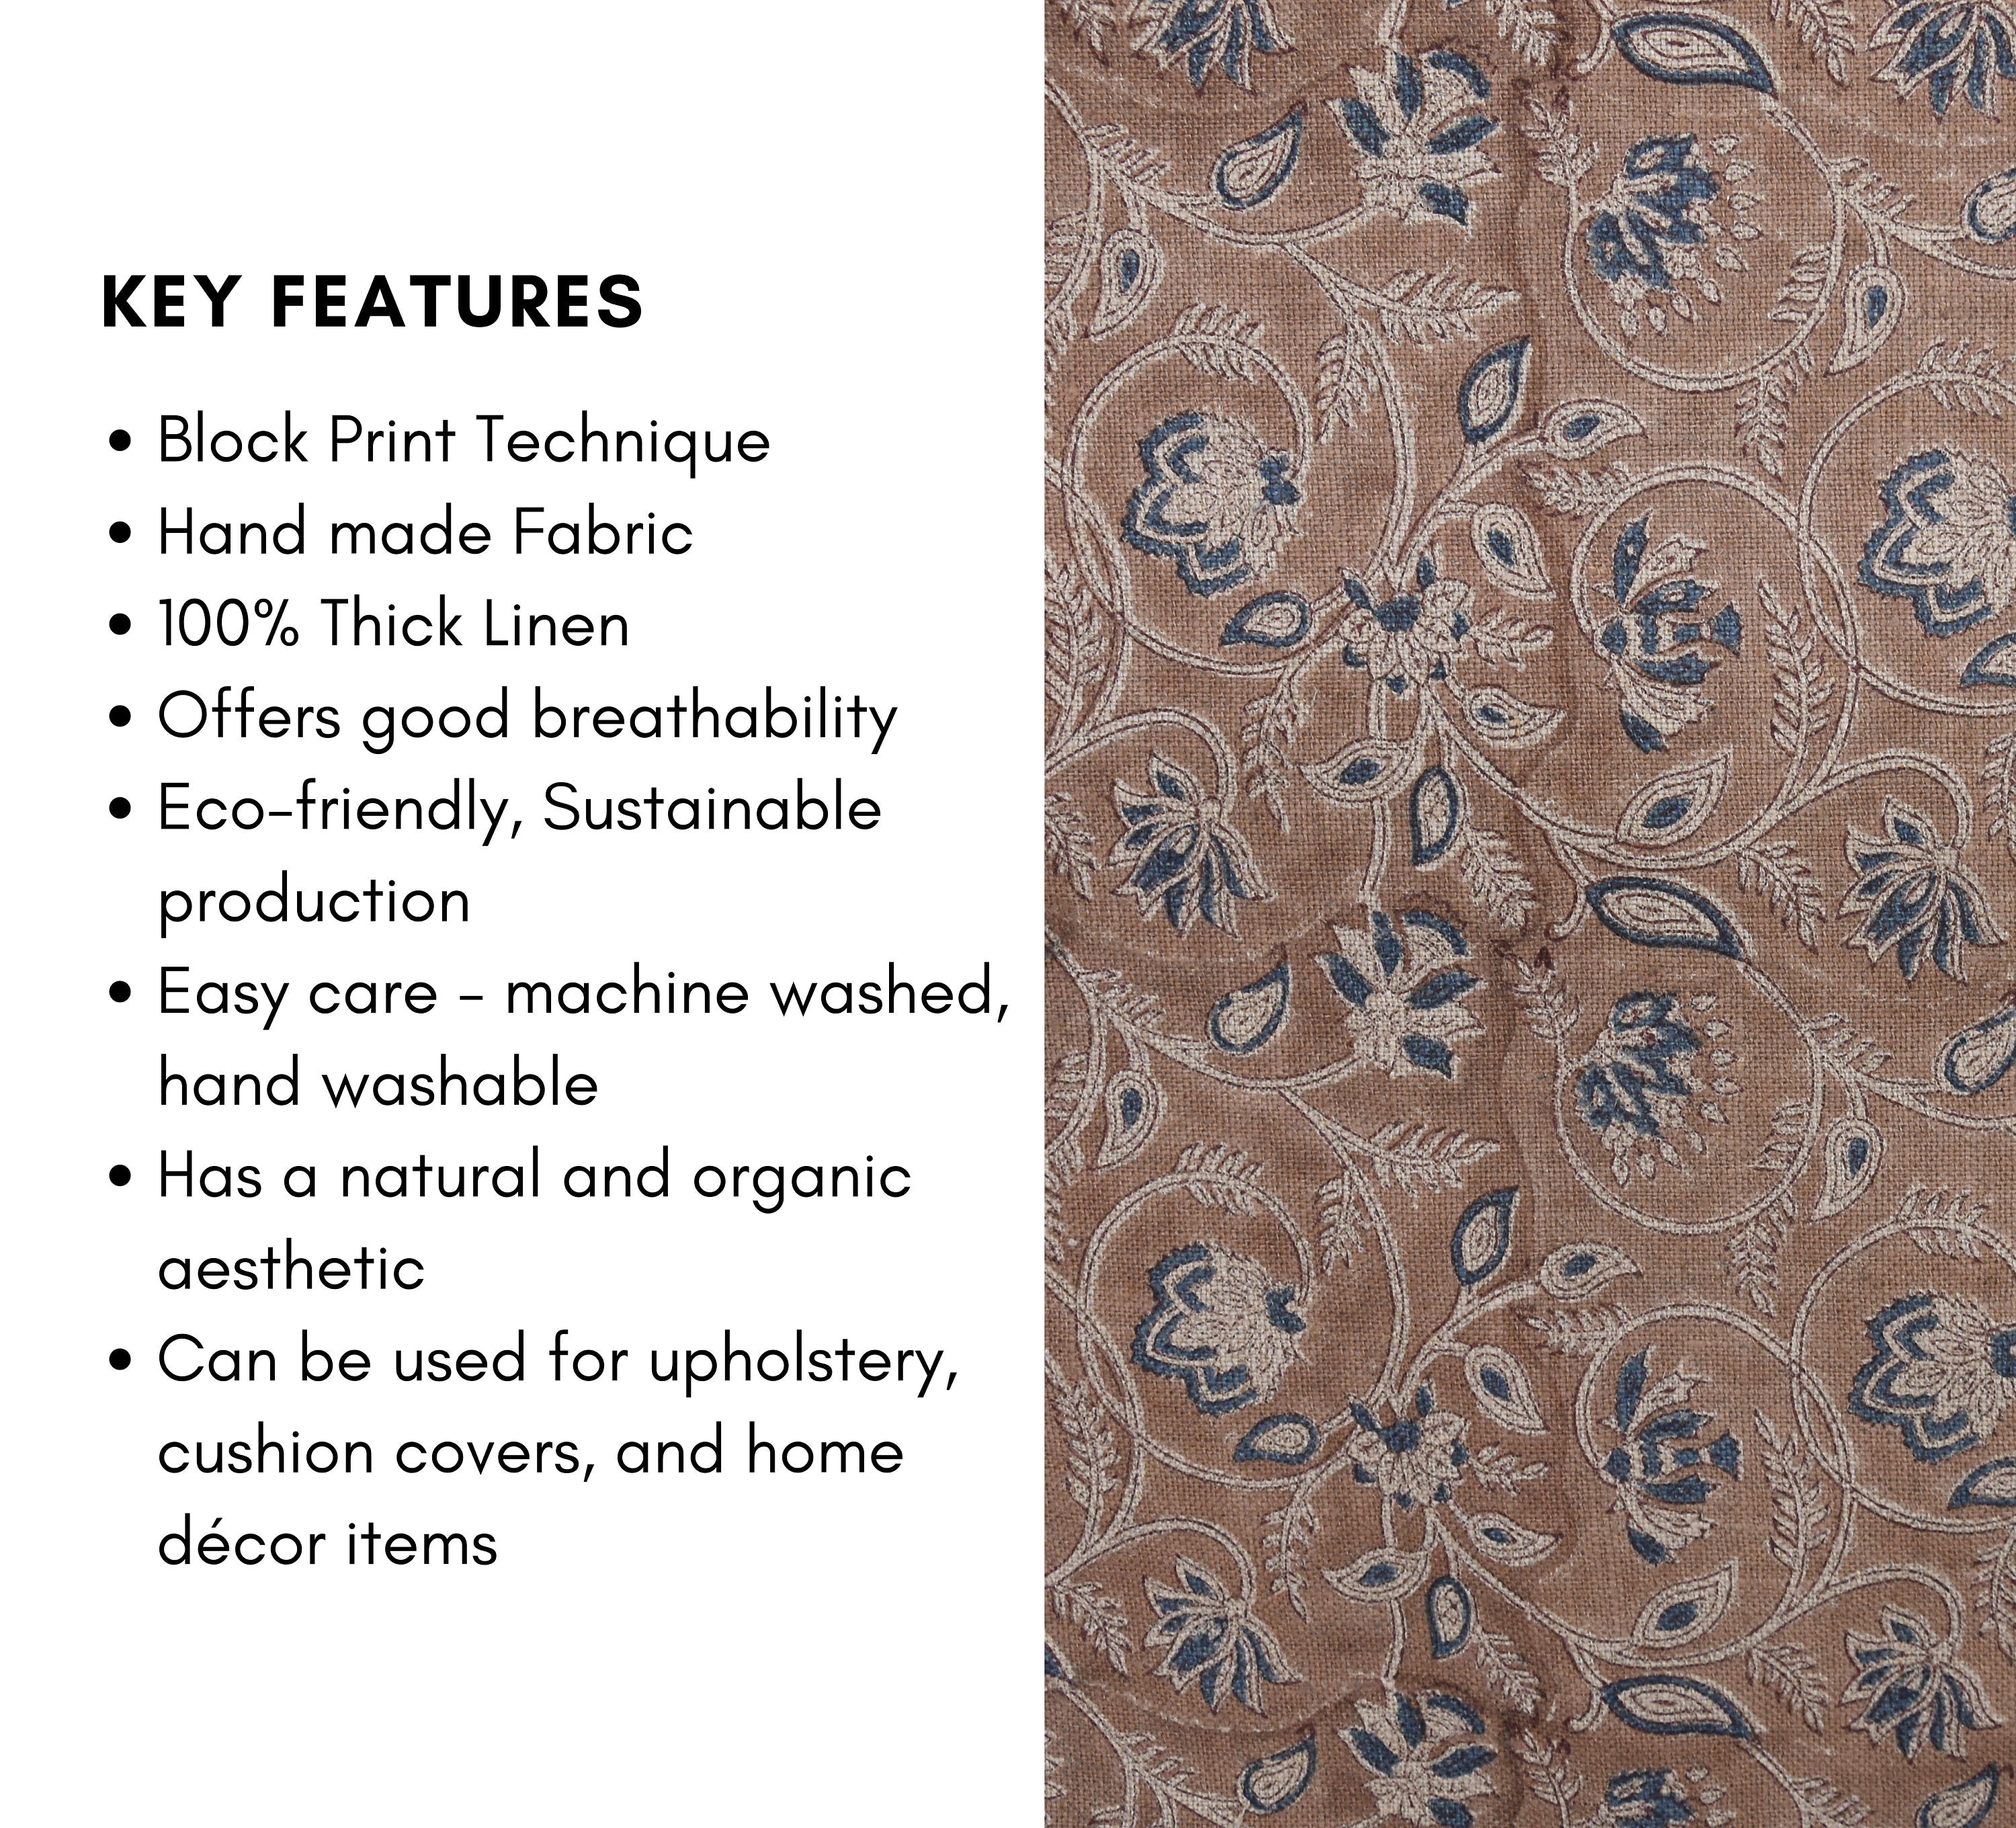 Block Print Thick Linen 58" Wide, Floral Print, Indian Fabric, Home Decor, Handcrafted Linen Fabric Table Cloth - SARASWATI